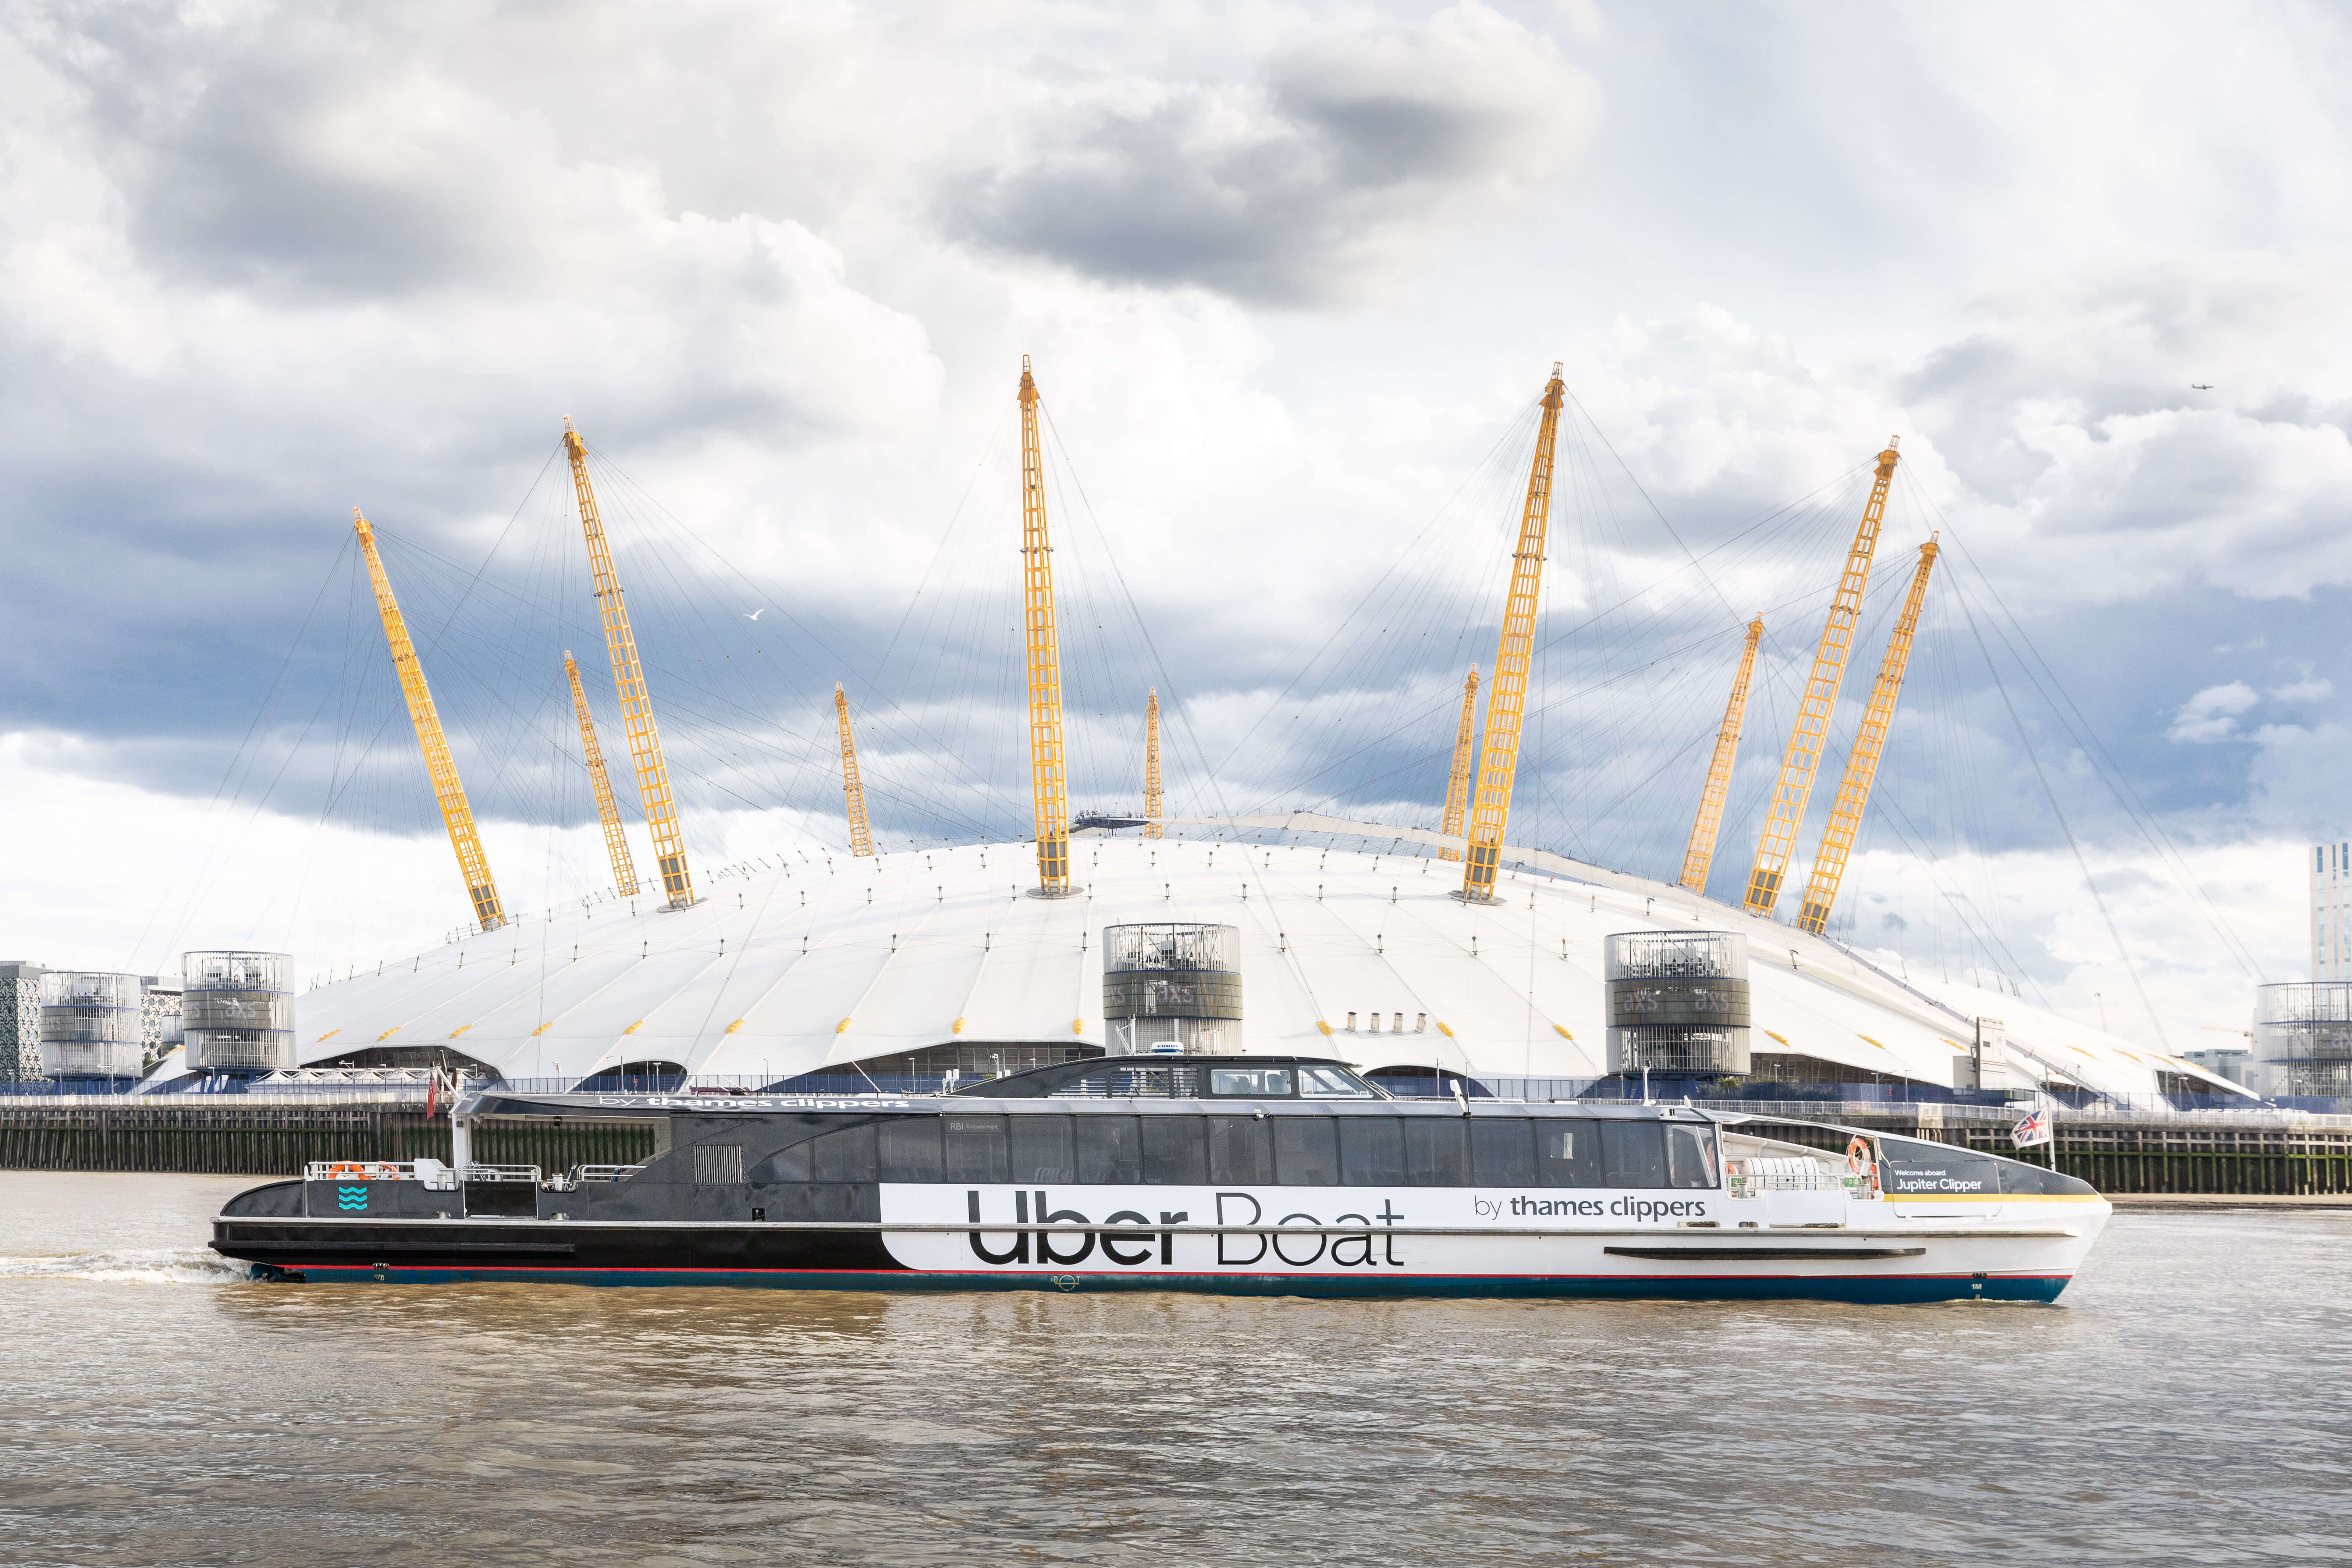 Uber_Boat_By_Thames_Clippers_3 copy